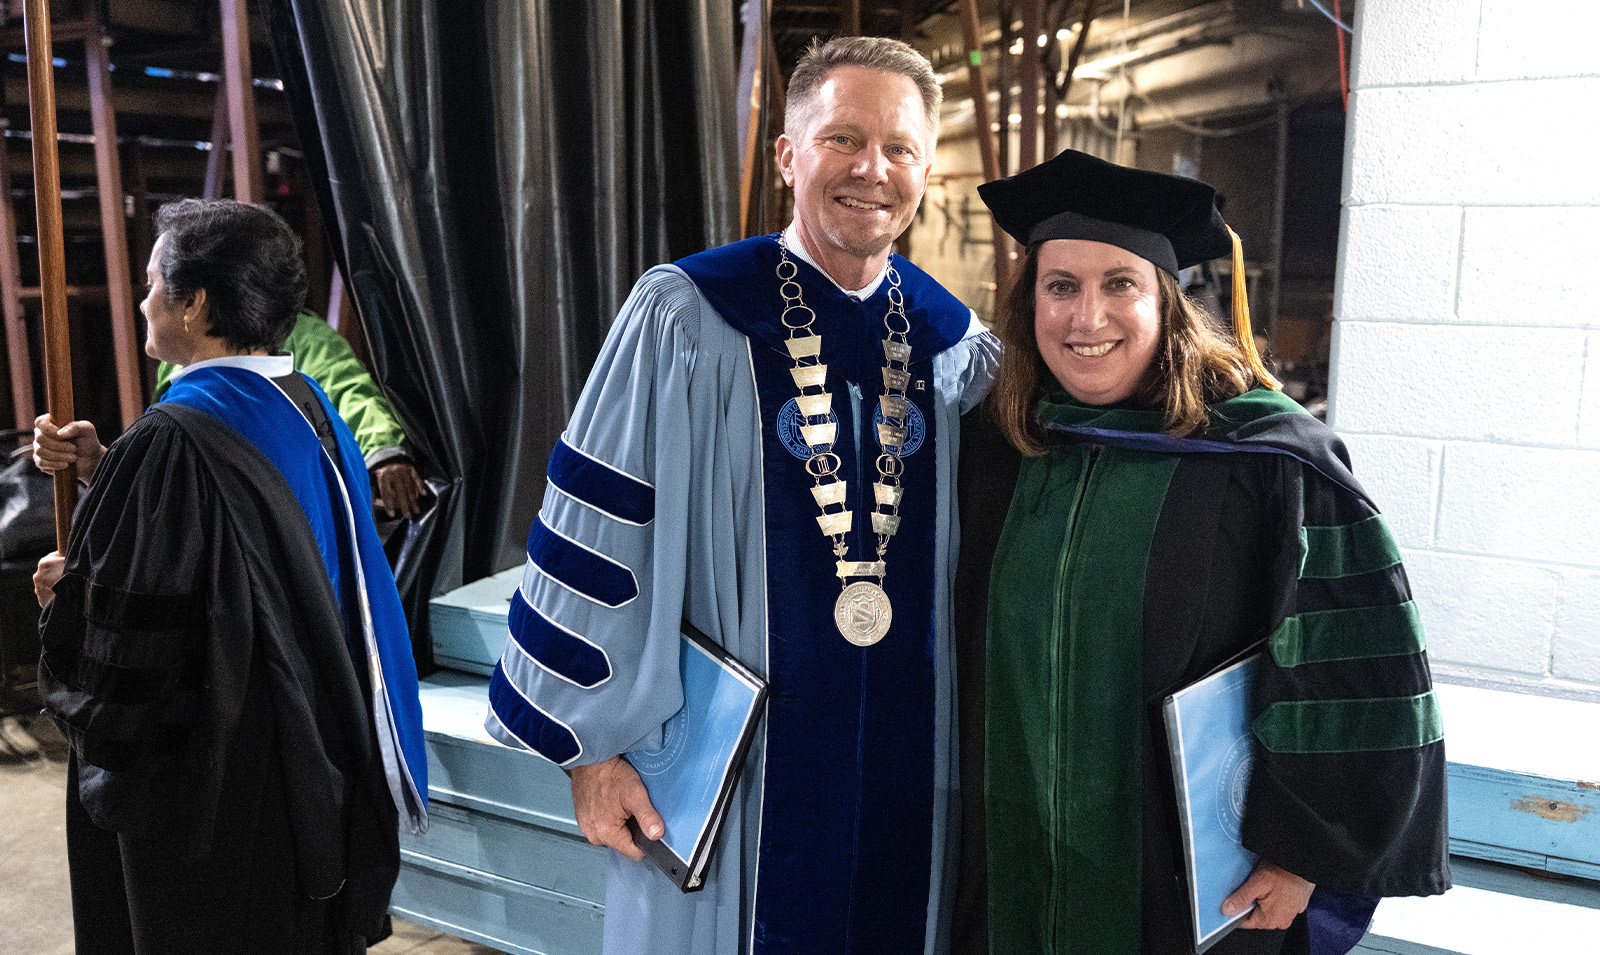 Kevin M. Guskiewicz and Dr. Samantha Meltzer-Brody posing for a photo together.